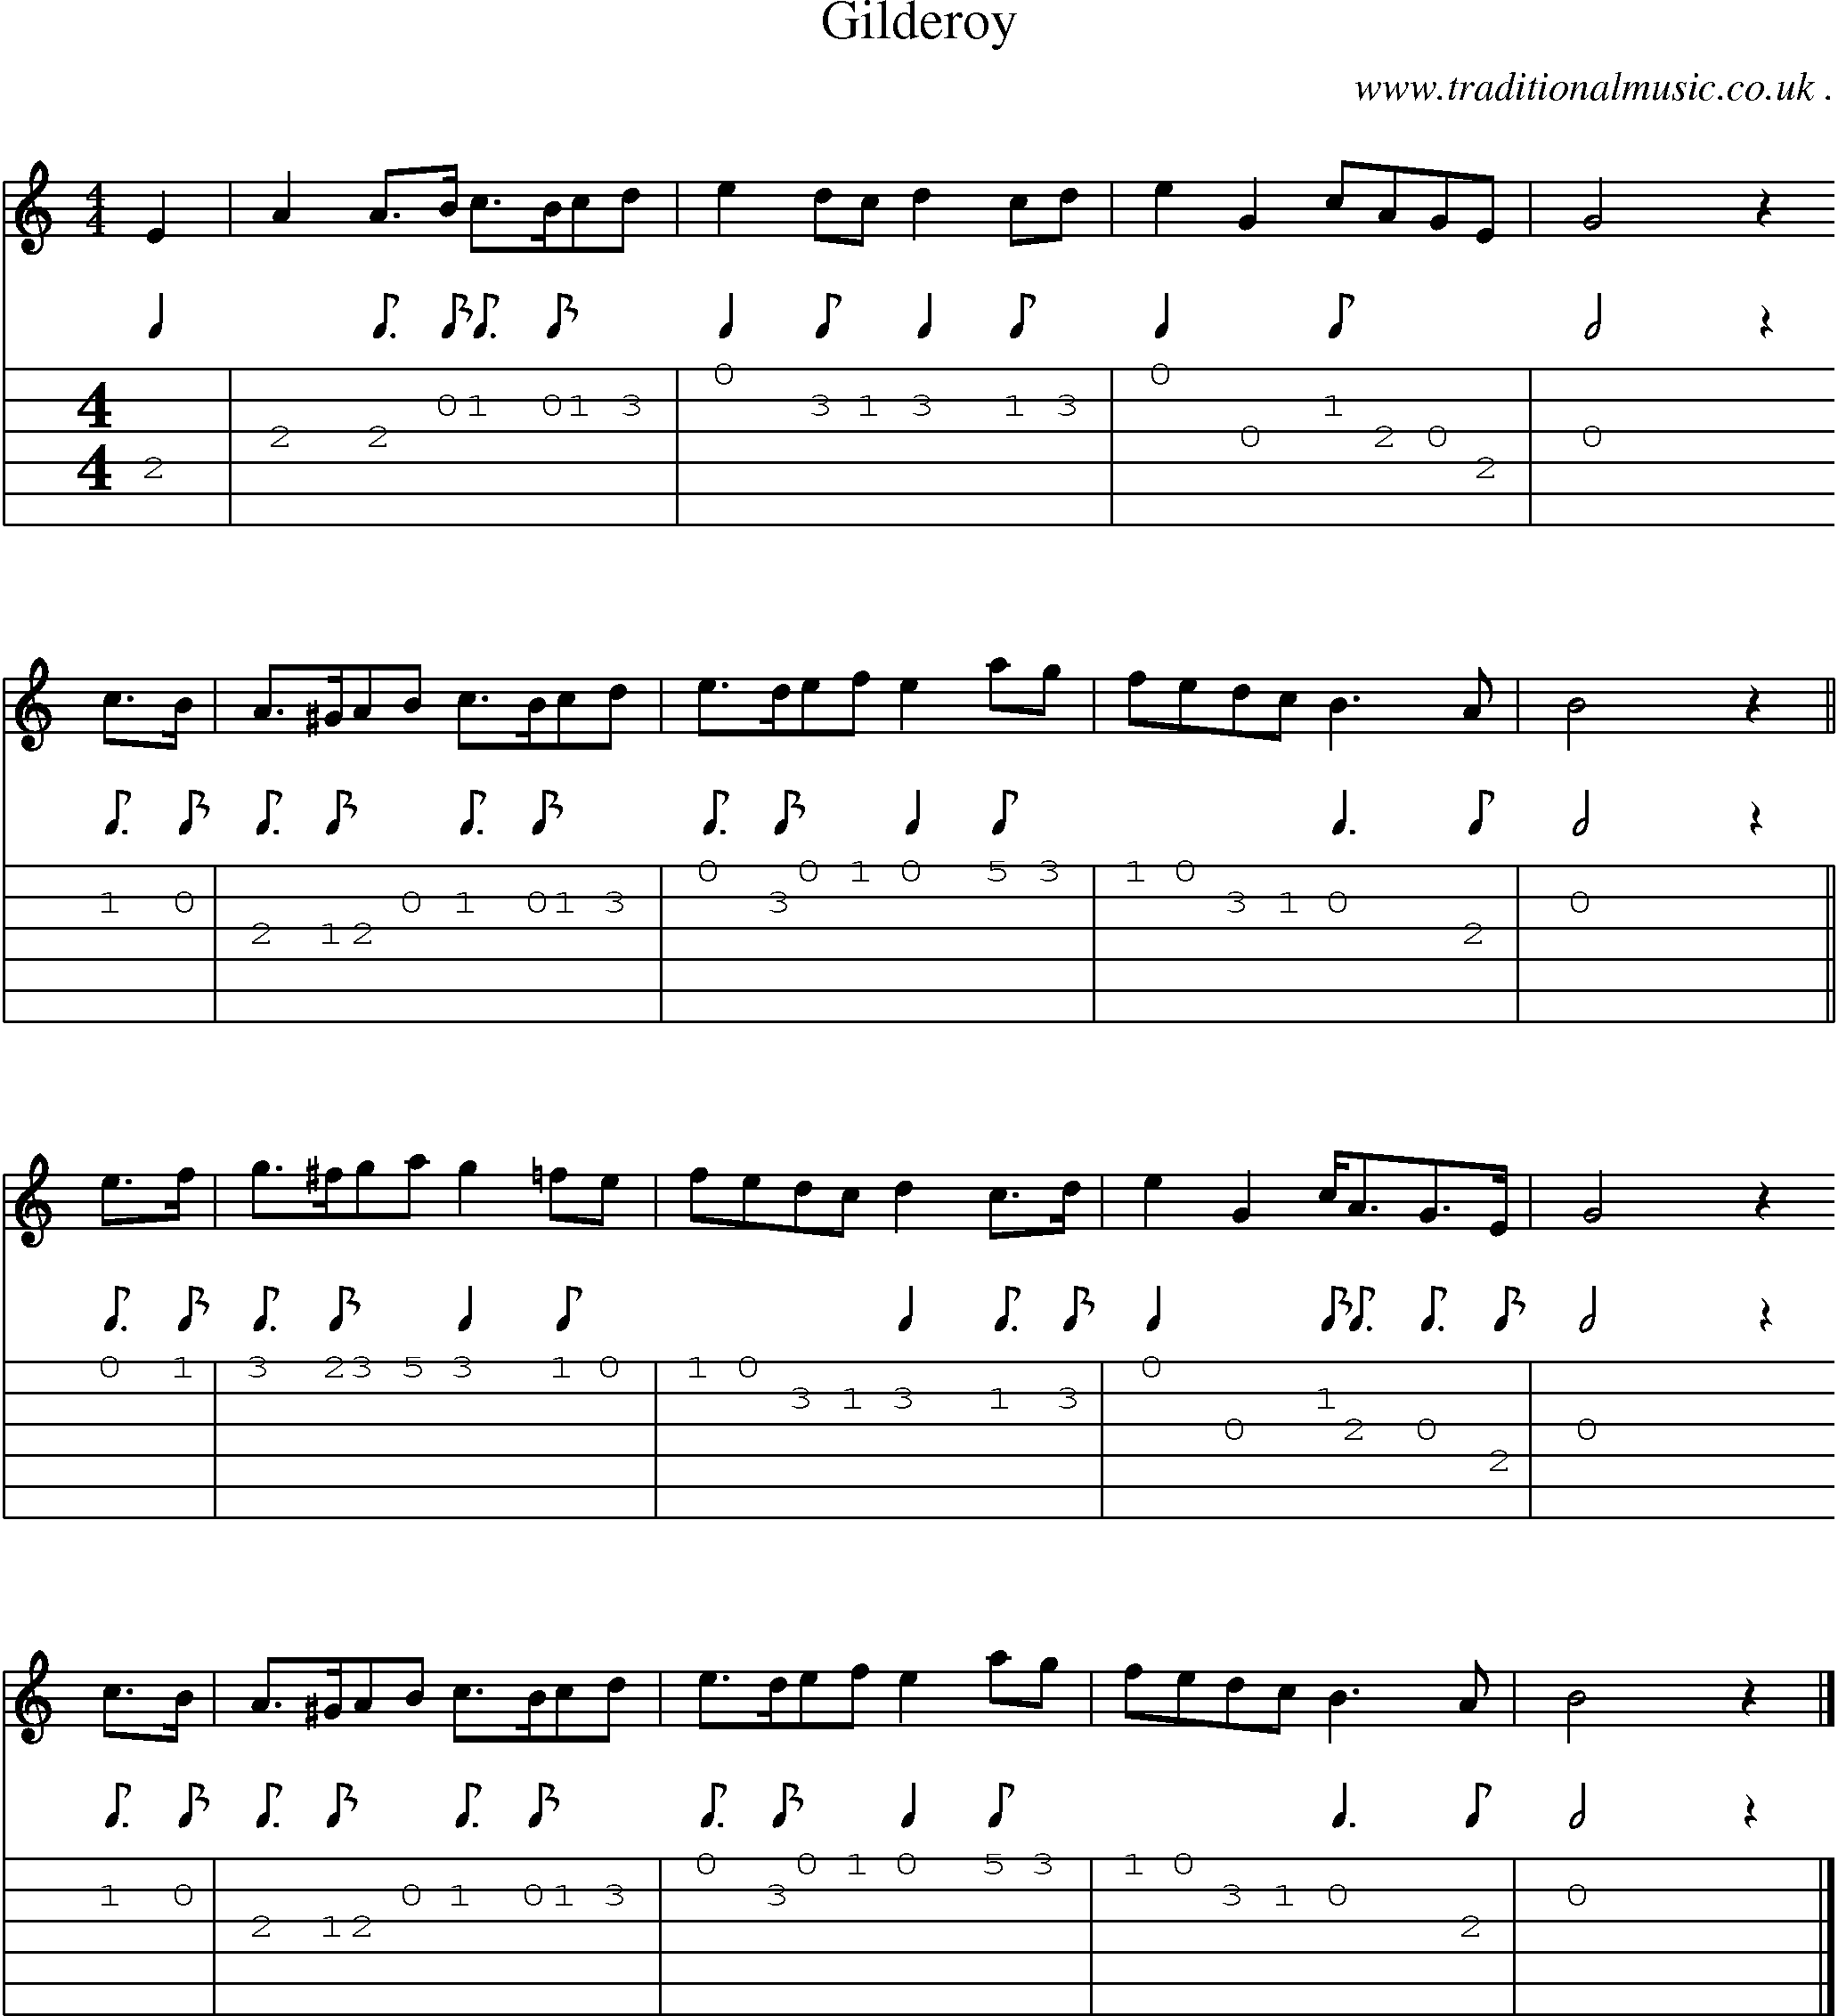 Sheet-music  score, Chords and Guitar Tabs for Gilderoy